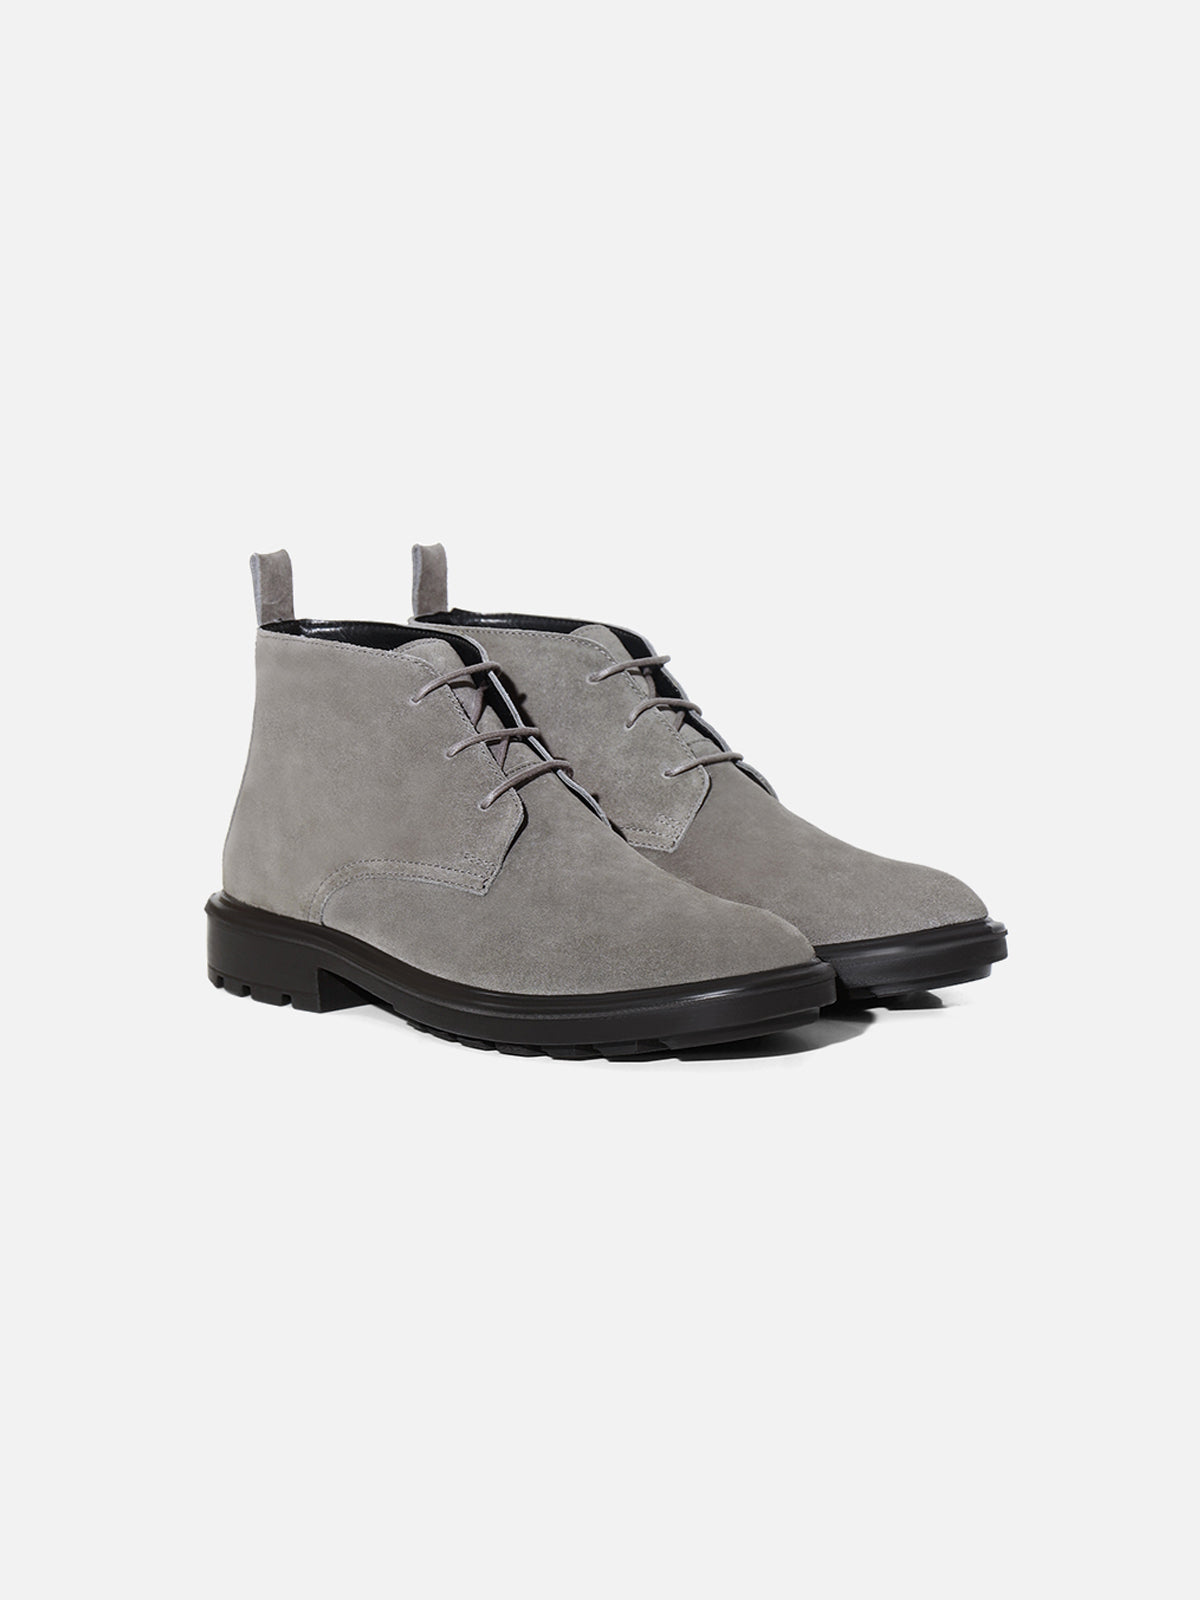 Suede Chukka Boots - FAMS23-019